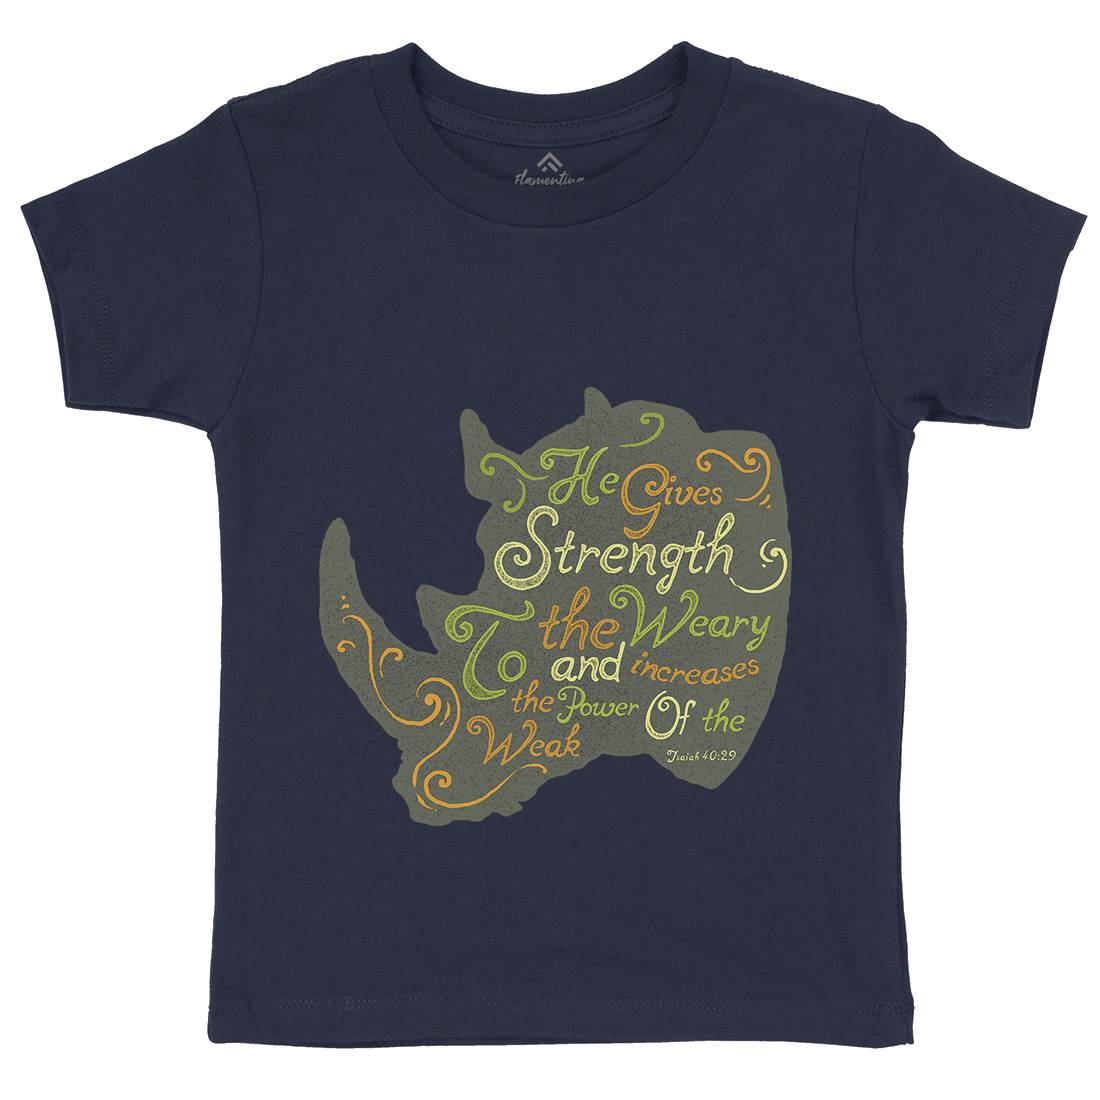 He Gives Strength Kids Crew Neck T-Shirt Religion A325